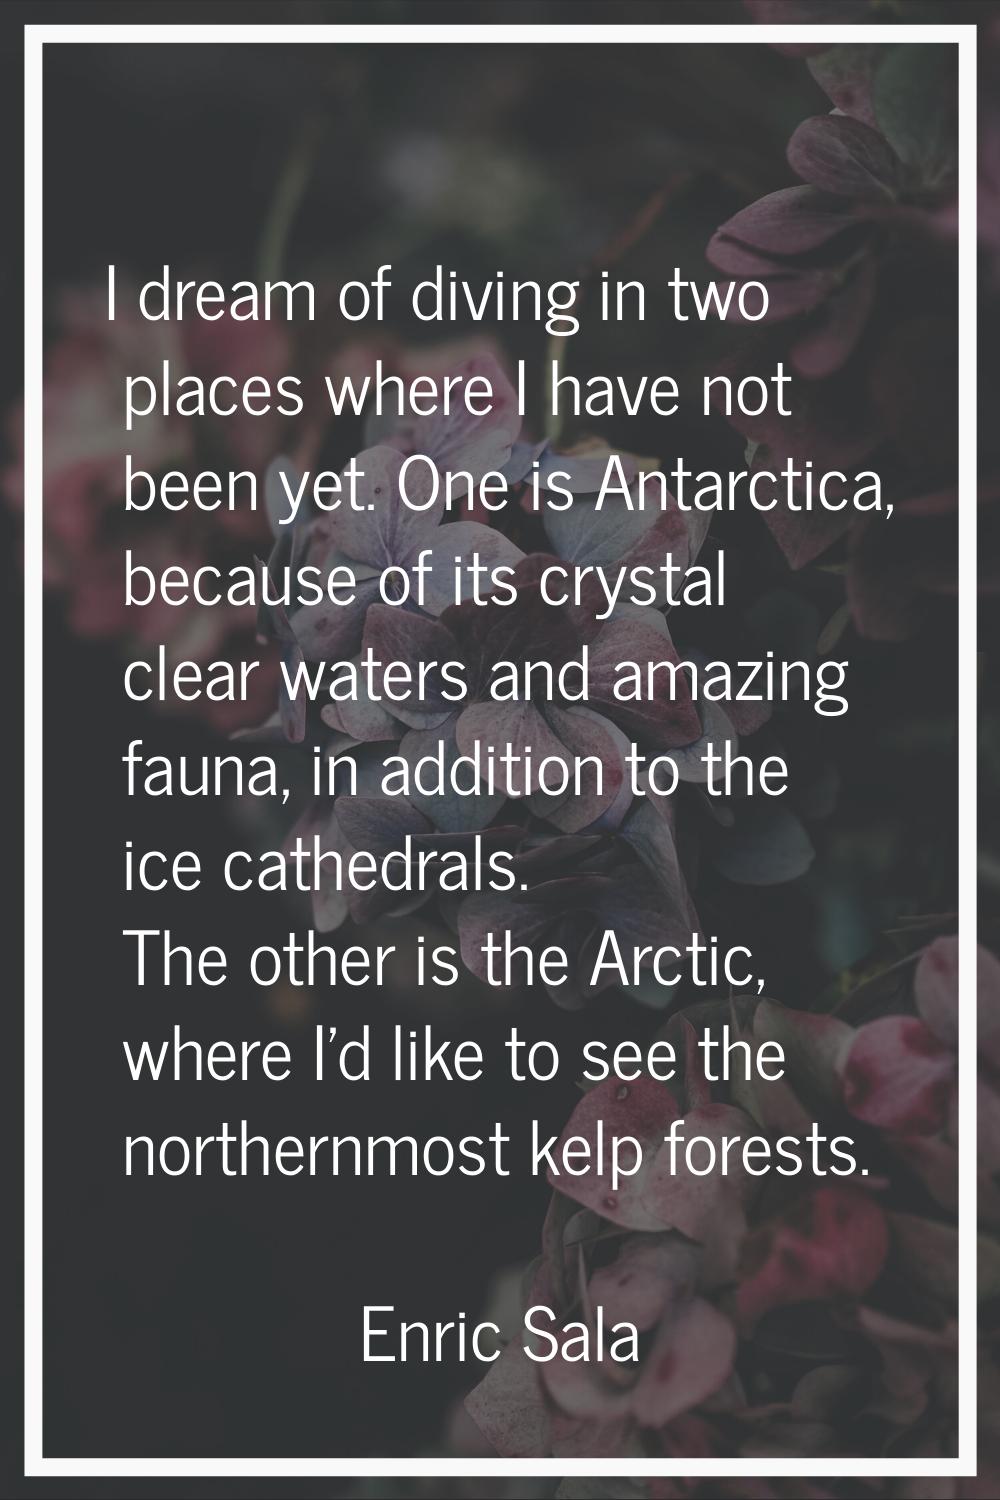 I dream of diving in two places where I have not been yet. One is Antarctica, because of its crysta